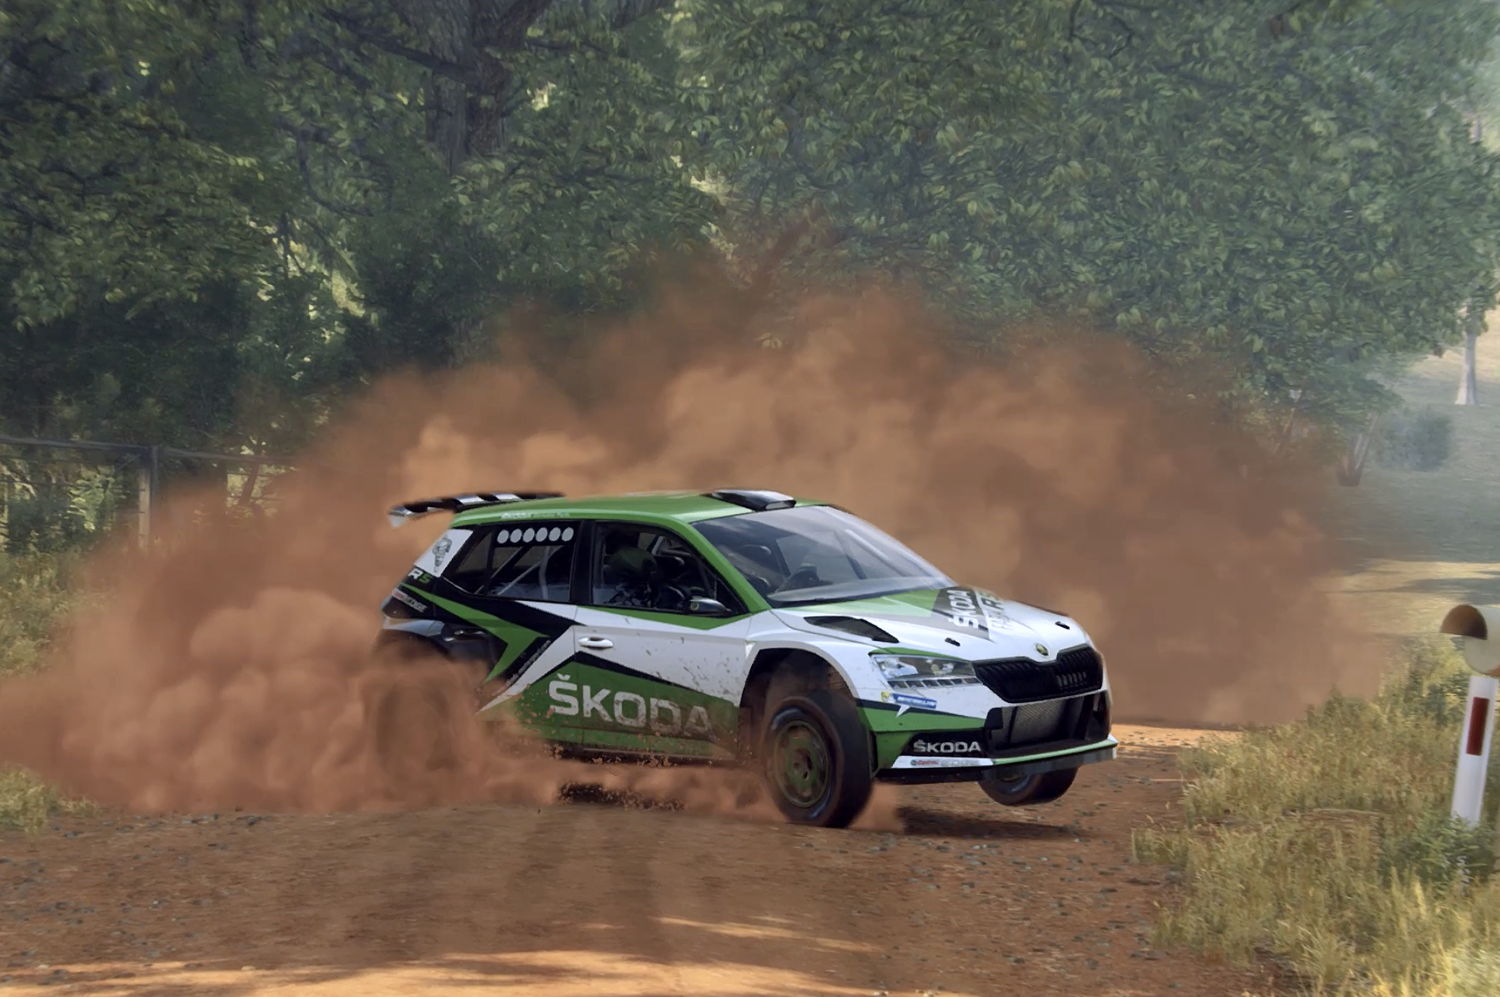 Virtual ŠKODA crews and their cars compete in the DiRT
Rally 2.0 online video game with the ŠKODA FABIA
Rally2 evo against rally aces and each other